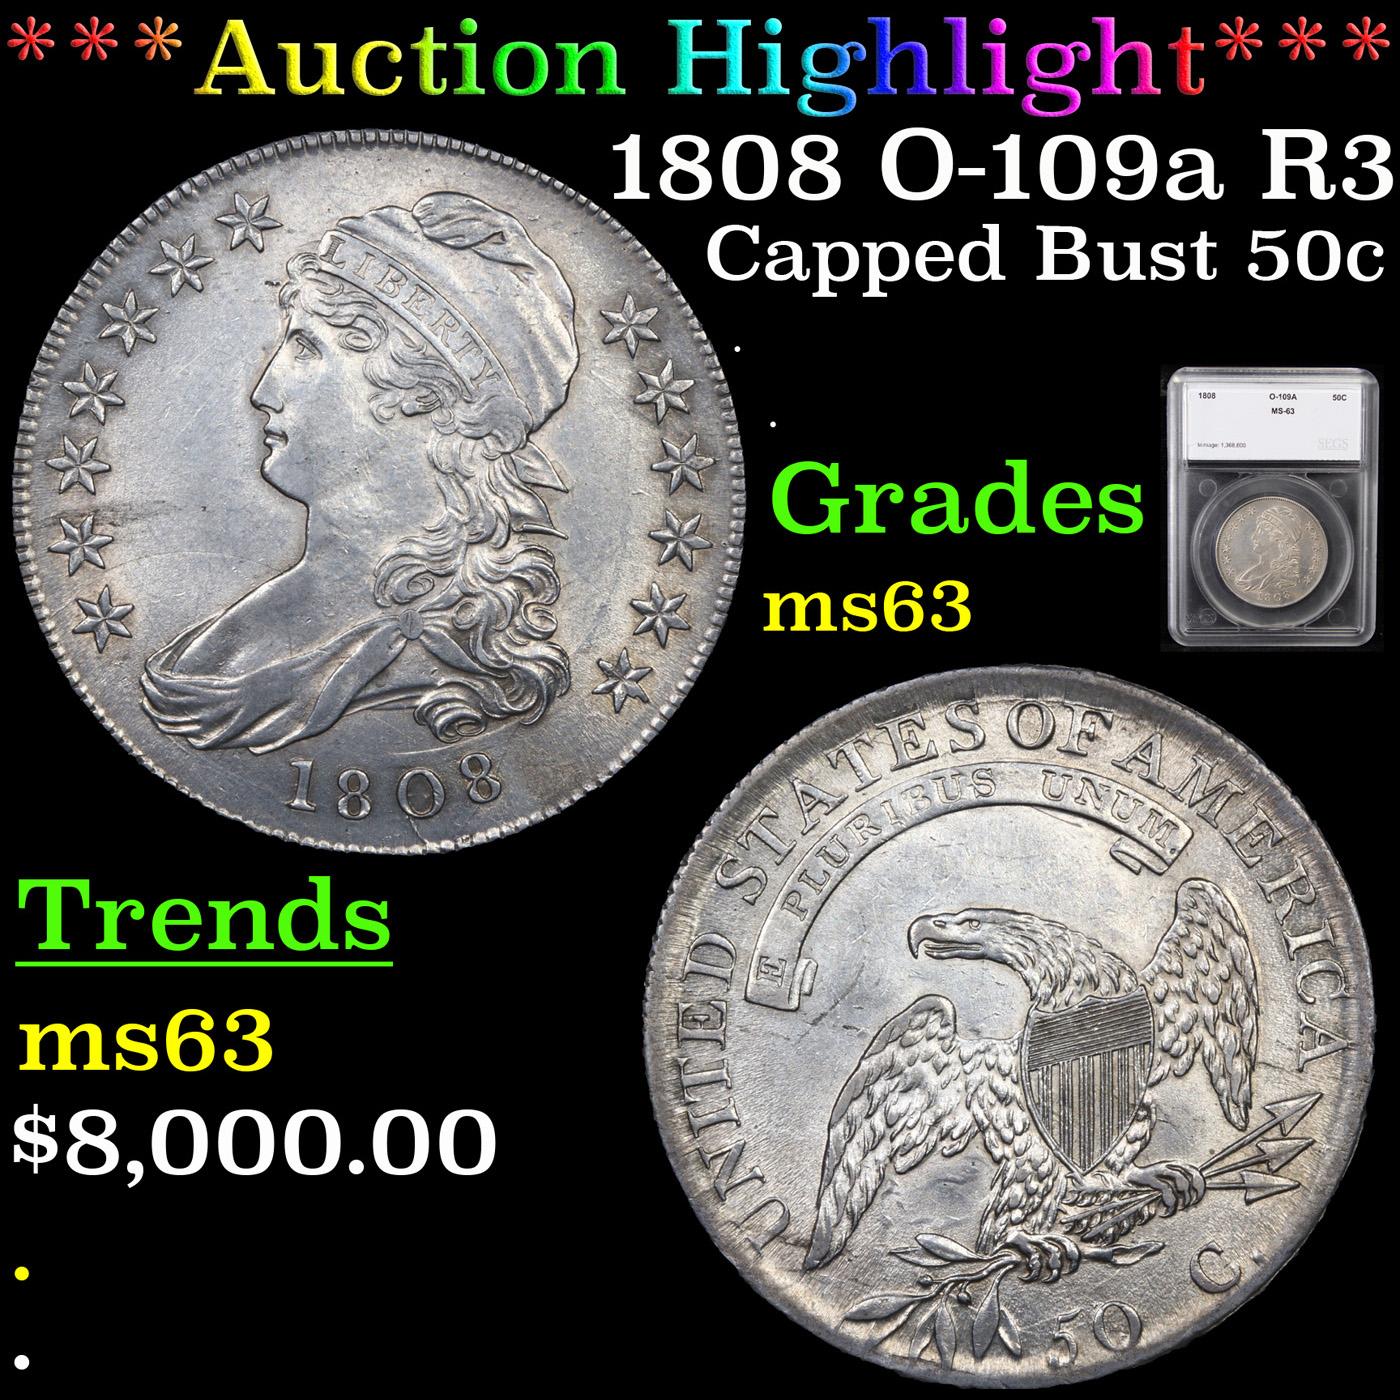 ***Auction Highlight*** 1808 O-109a R3 Capped Bust Half Dollar 50c Graded ms63 By SEGS (fc)